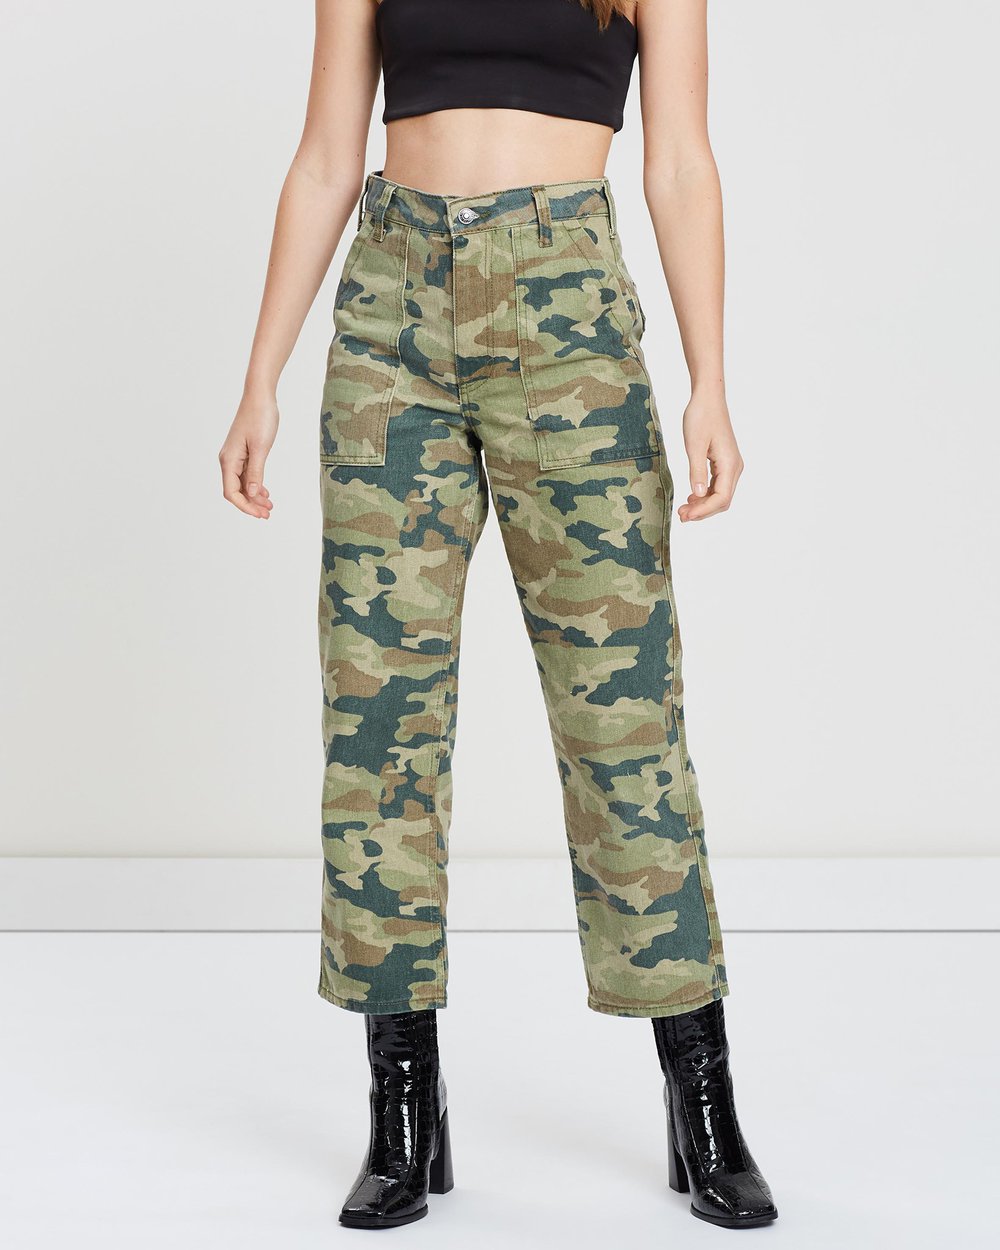 FREE PEOPLE: REMY CAMO CROPPED PANTS